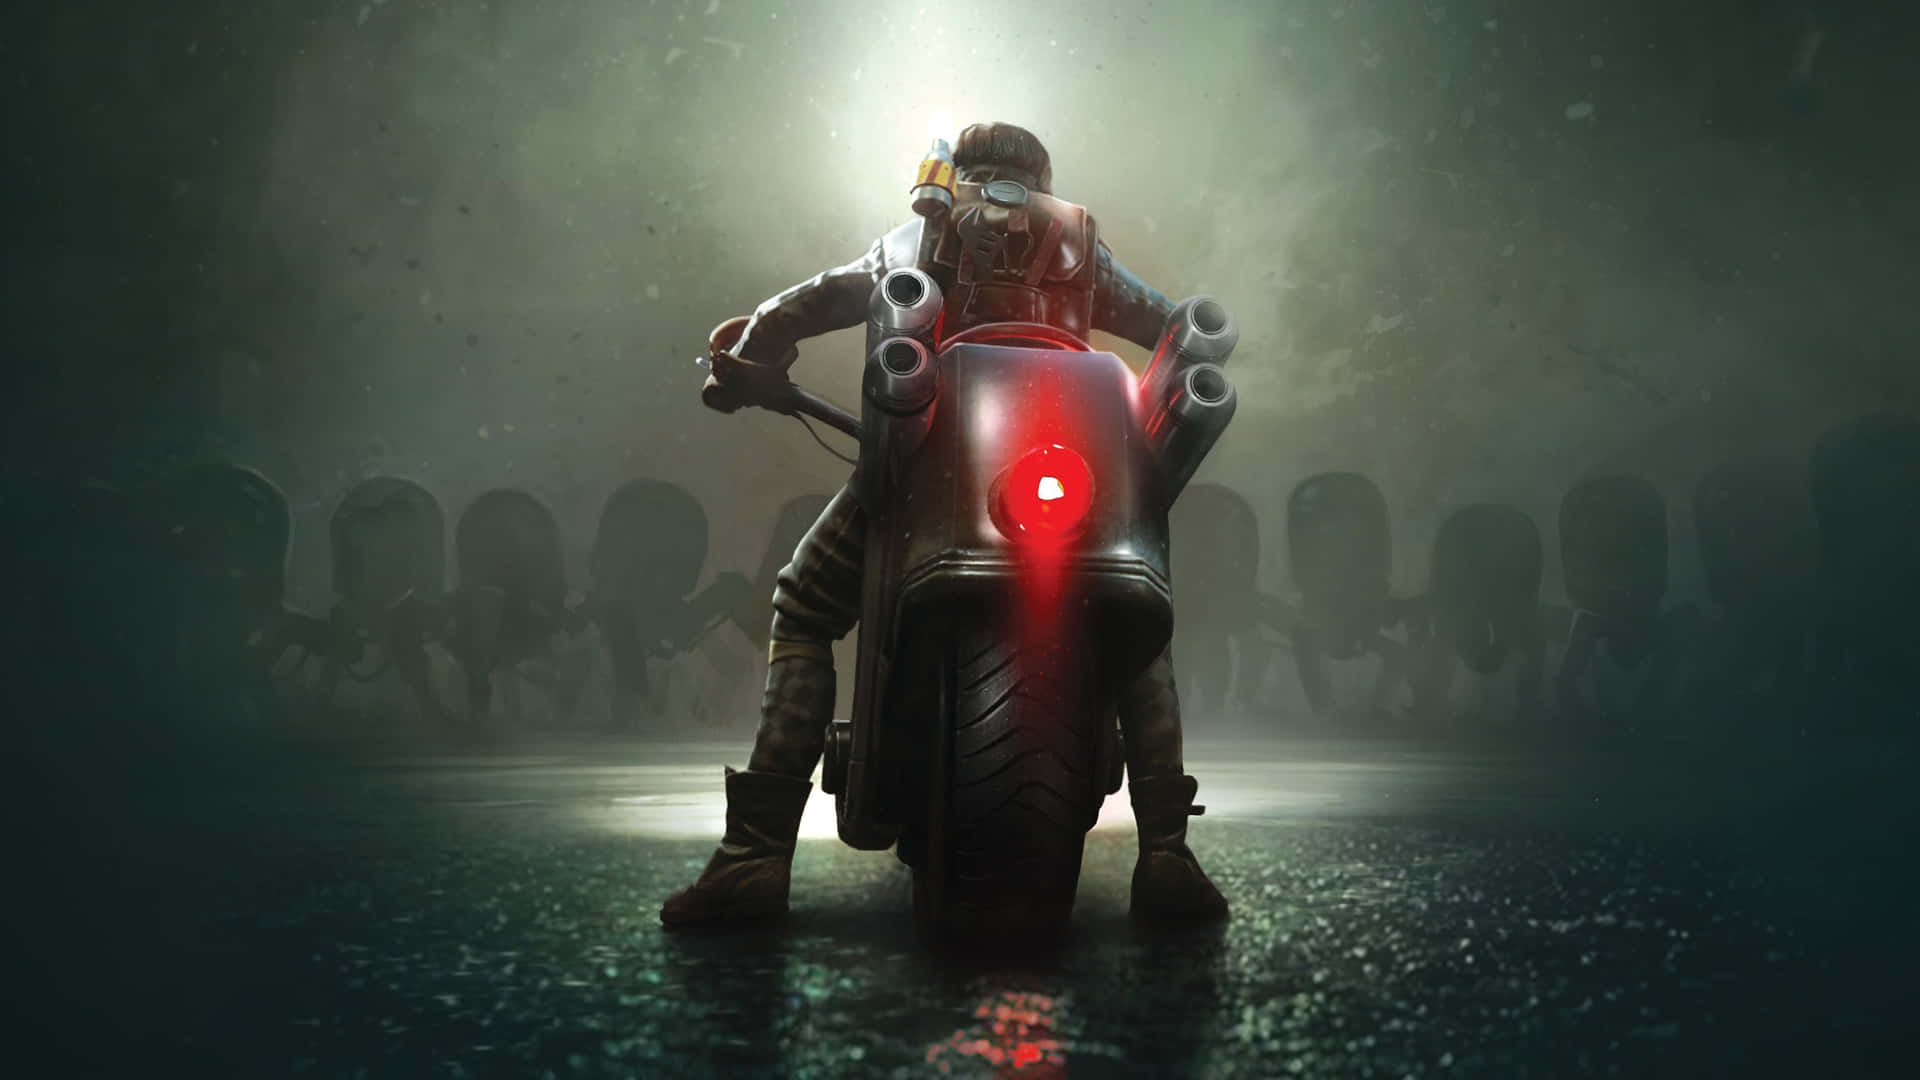 A Man Riding A Motorcycle In The Dark